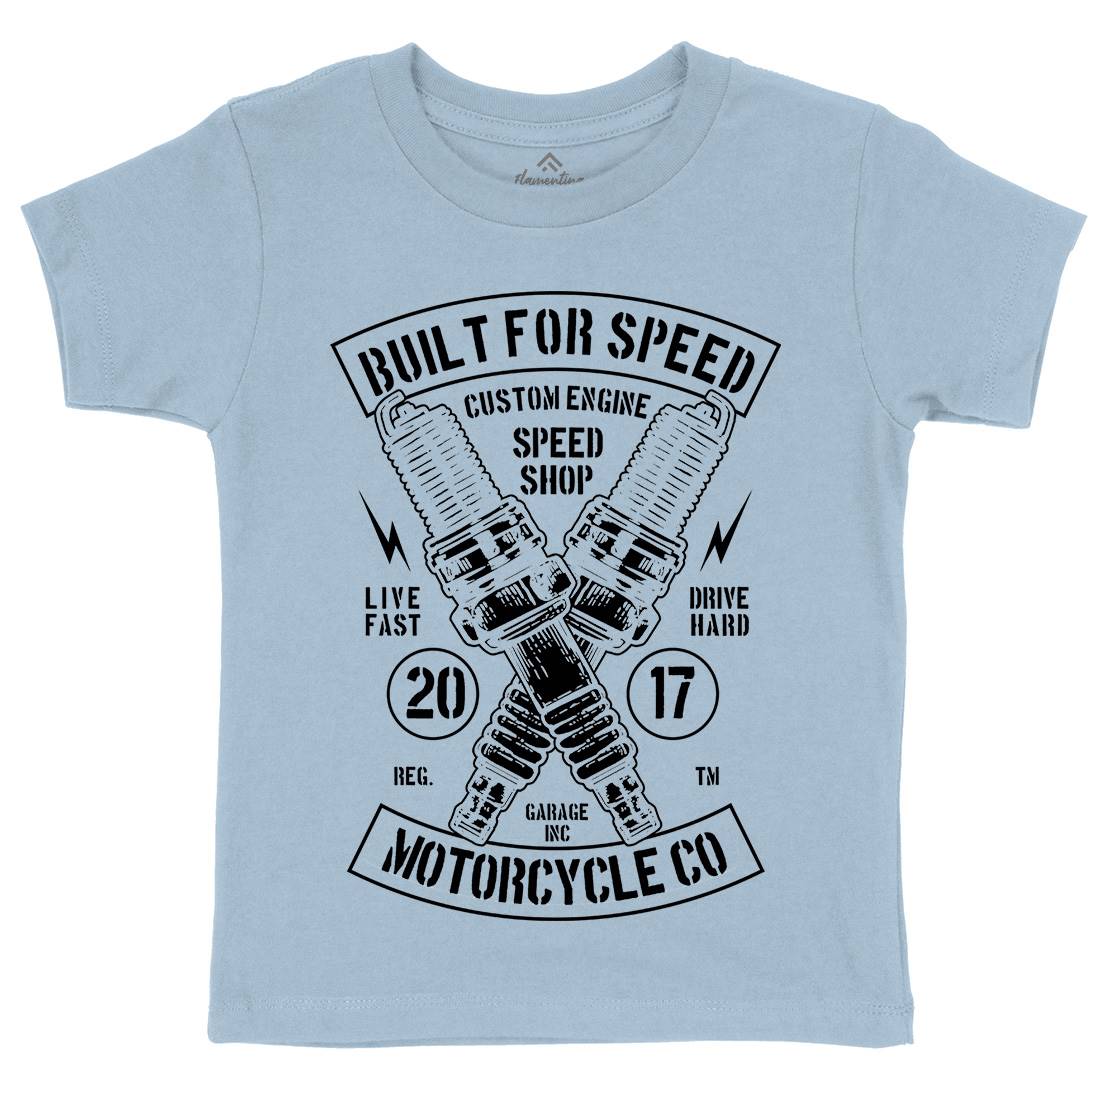 Built For Speed Kids Crew Neck T-Shirt Motorcycles B188